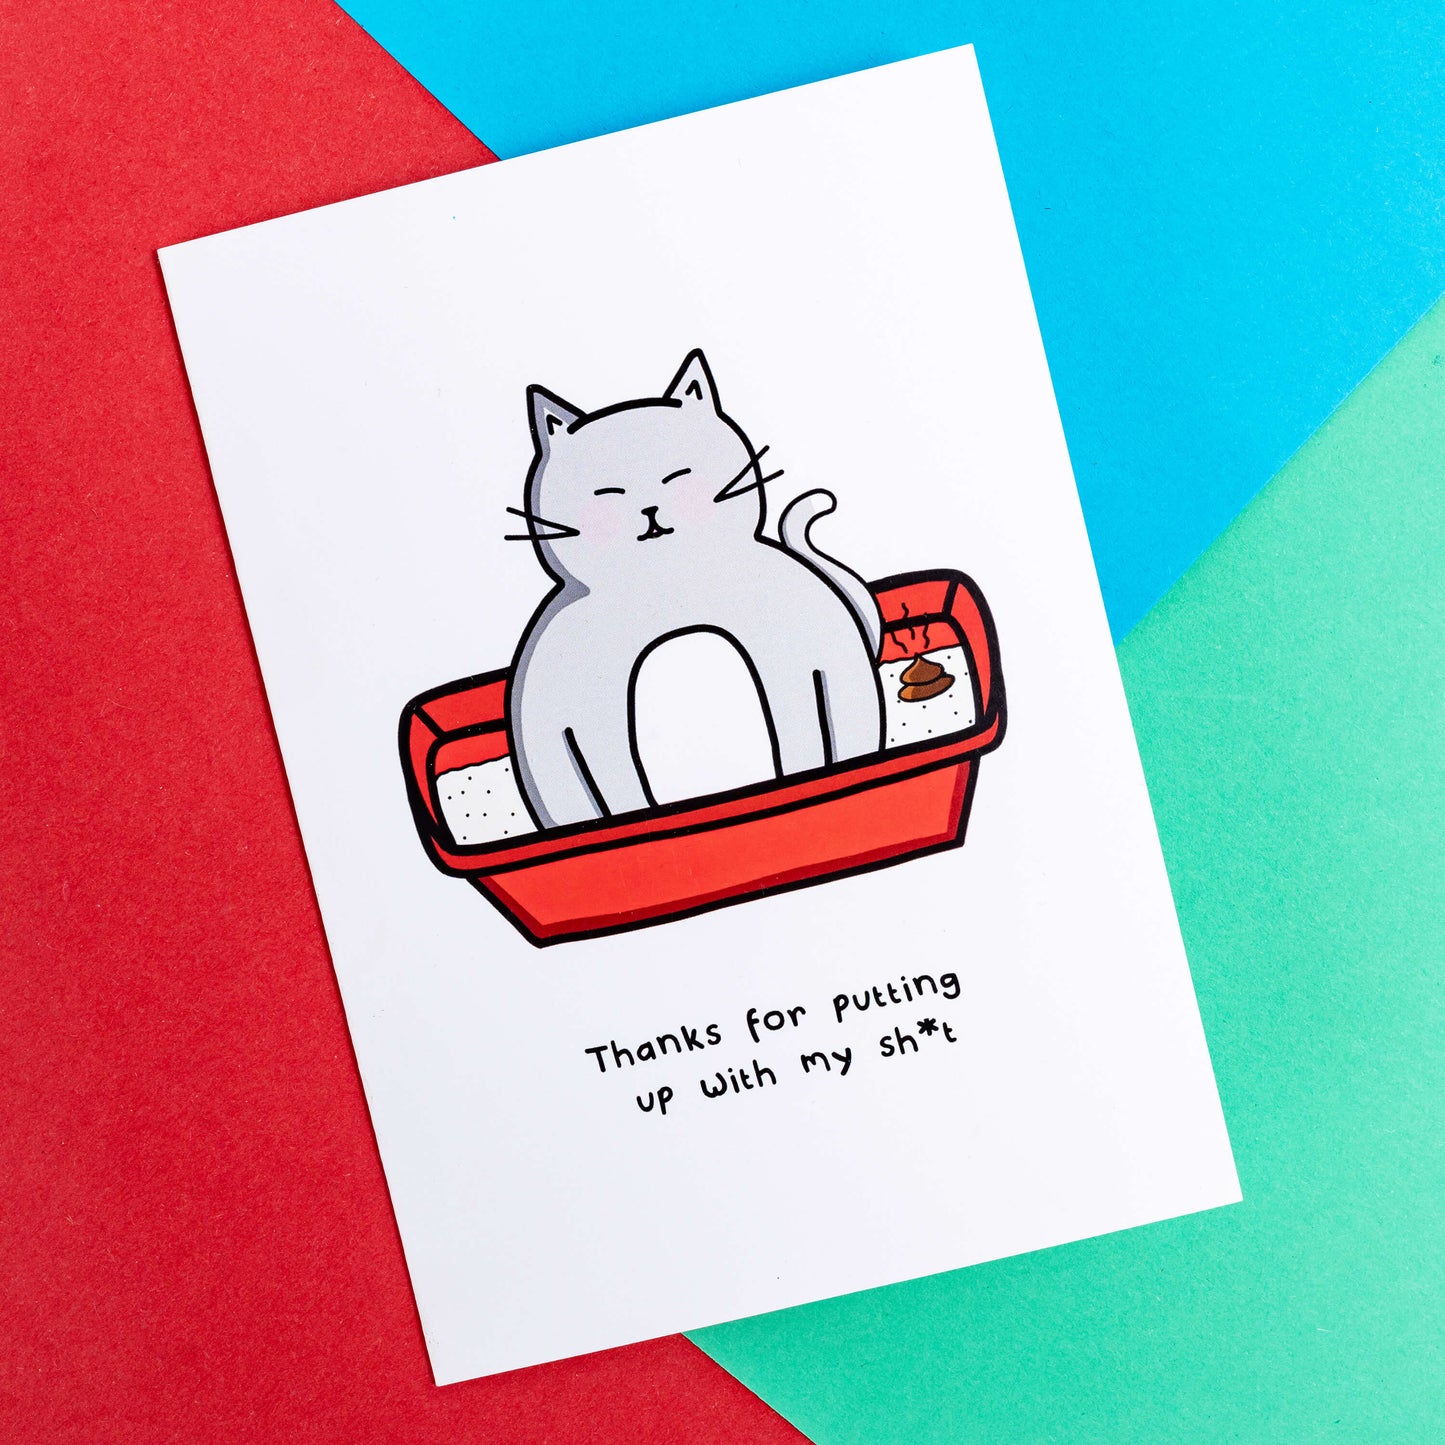 A white card with a drawing of a grey cat sat in a litter box with a poop in it with text underneath that says, thanks for putting up with my sh*t. The a6 thank you card is laying on a red, blue and green background.